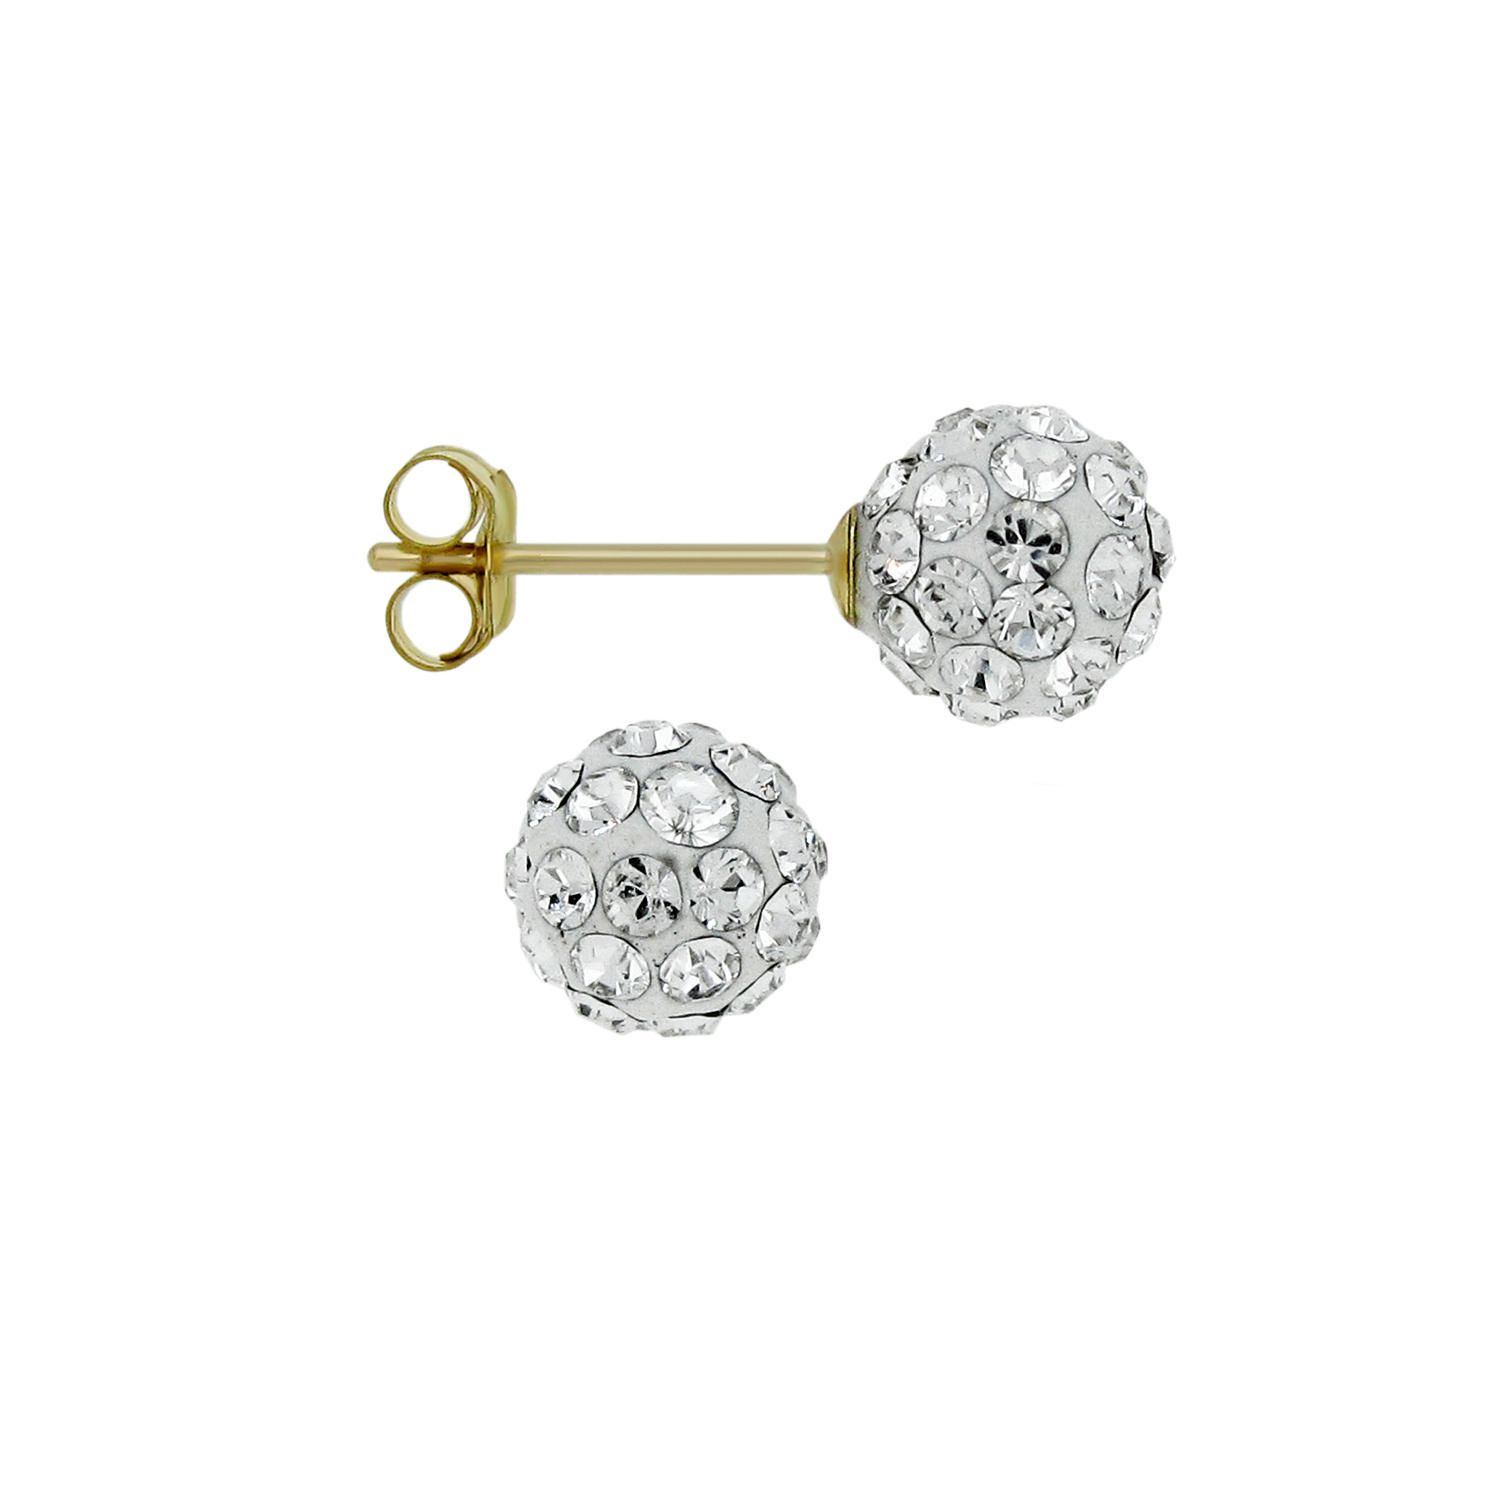 Aurelle- 10KT Yellow Gold Boxed Earrings with 5.8mm Swarovski Crsytals ...